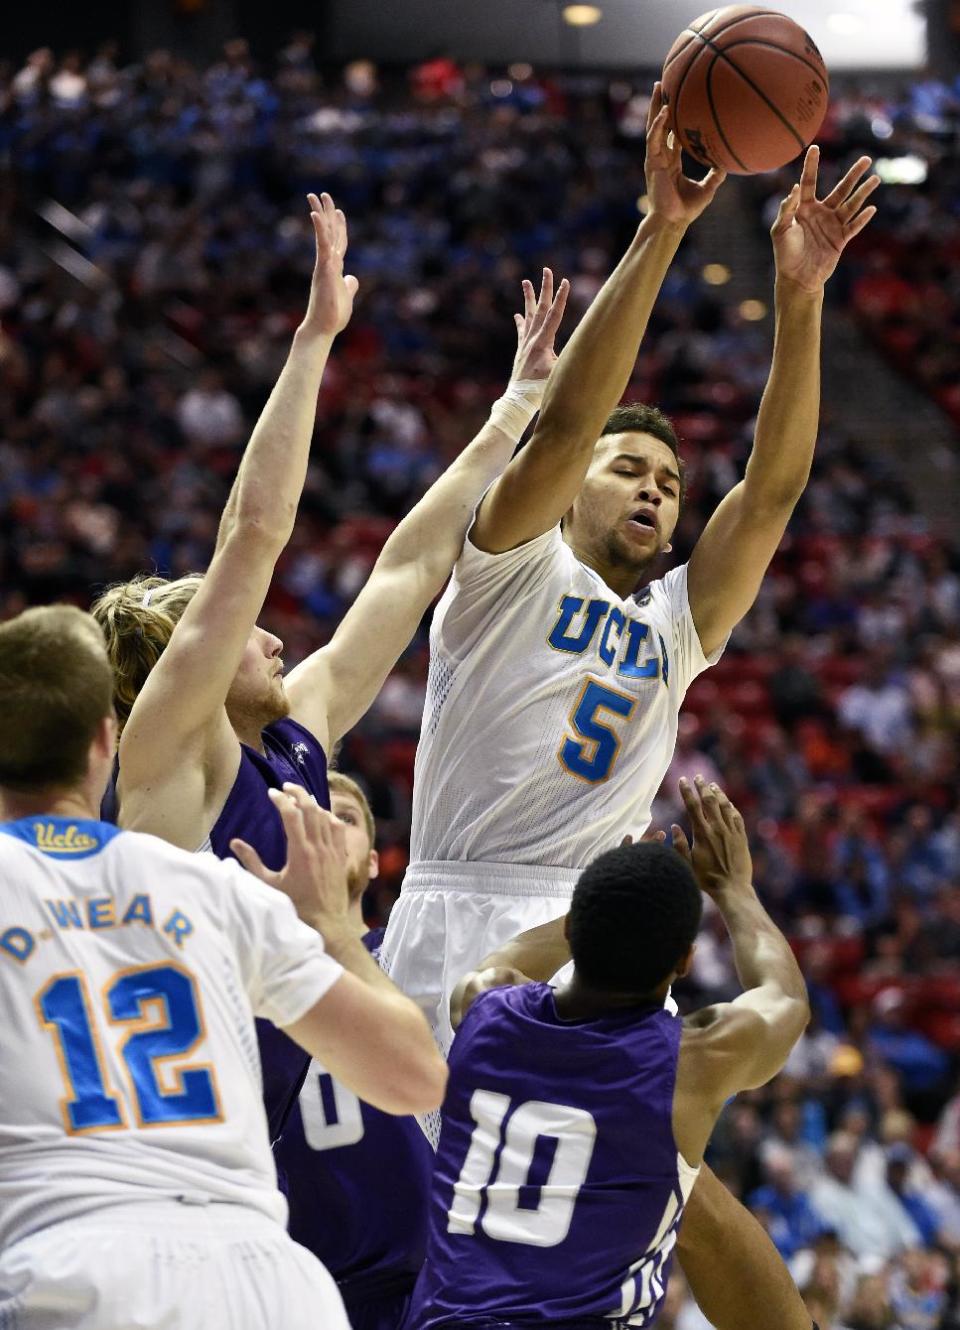 UCLA guard Kyle Anderson (5) throws an outlet pass after being confronted by Stephen F. Austin guard Trey Pinkney in a third-round game in the NCAA college basketball tournament, Sunday, March 23, 2014, in San Diego. (AP Photo/Denis Poroy)